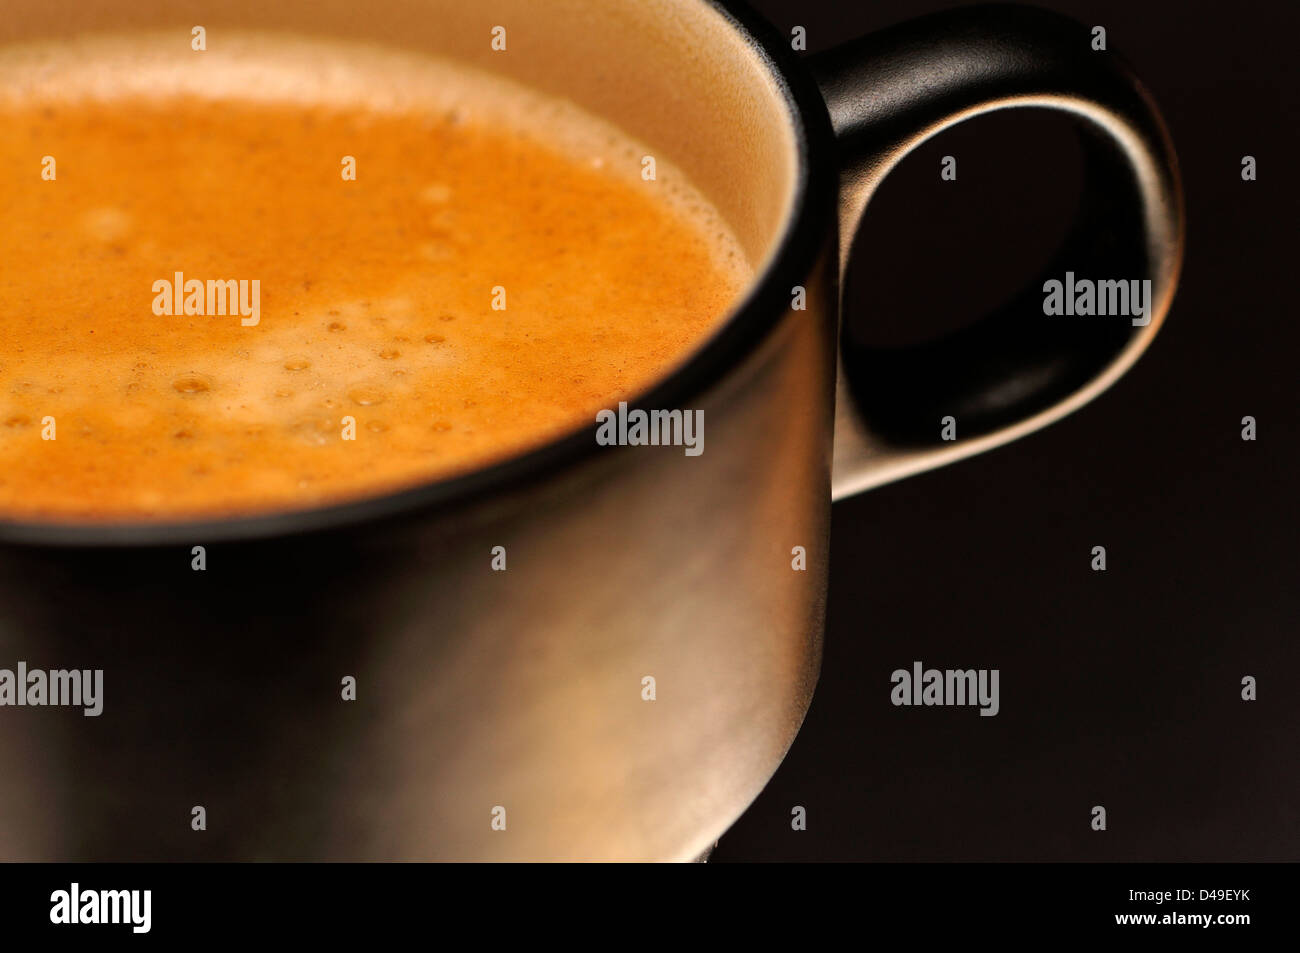 Large espresso coffee in black cup Stock Photo